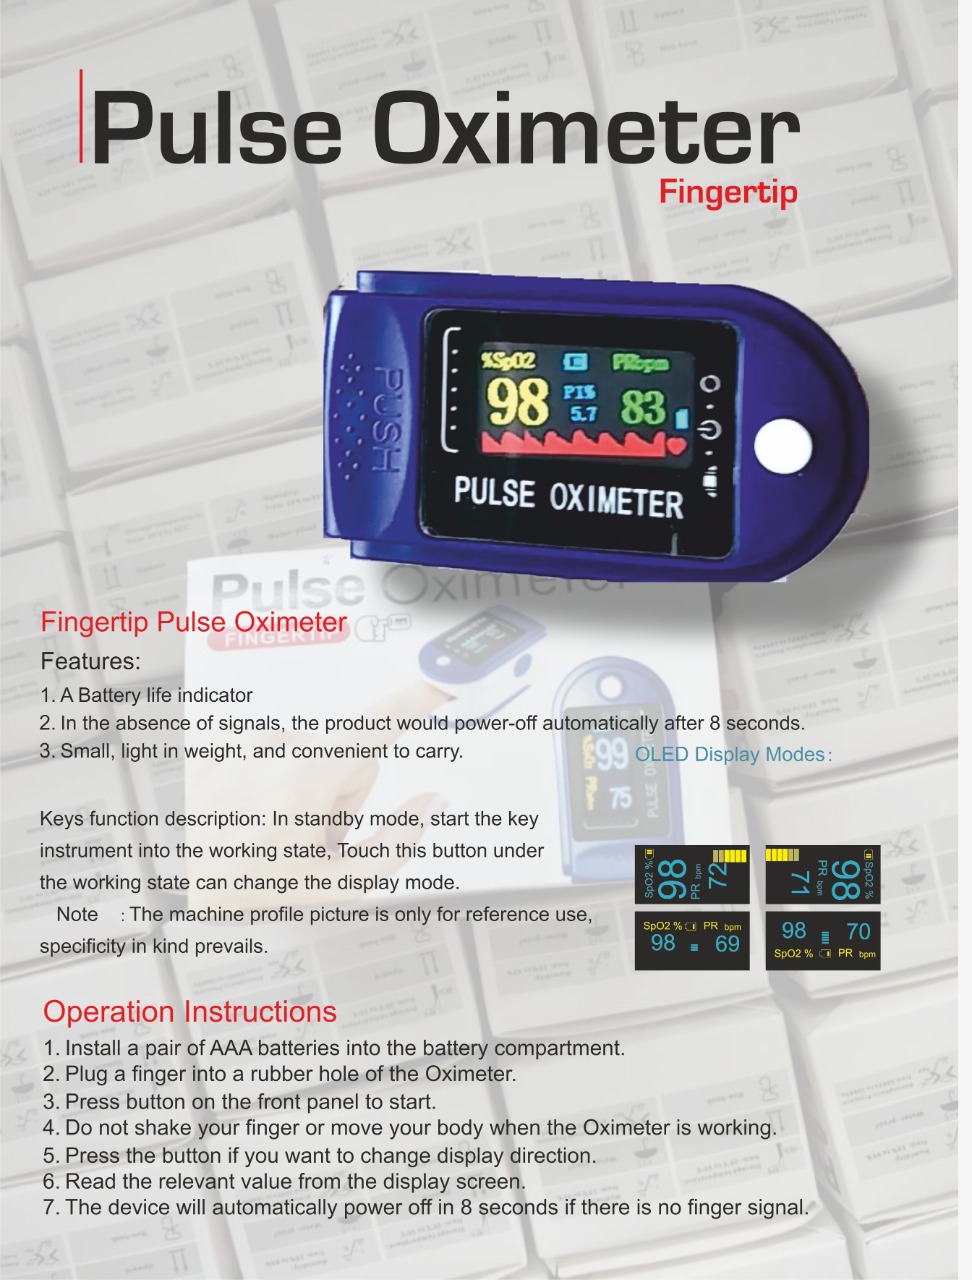 Newtech Medical Devices - Pulse Oximeter from Newtech Medical Devices